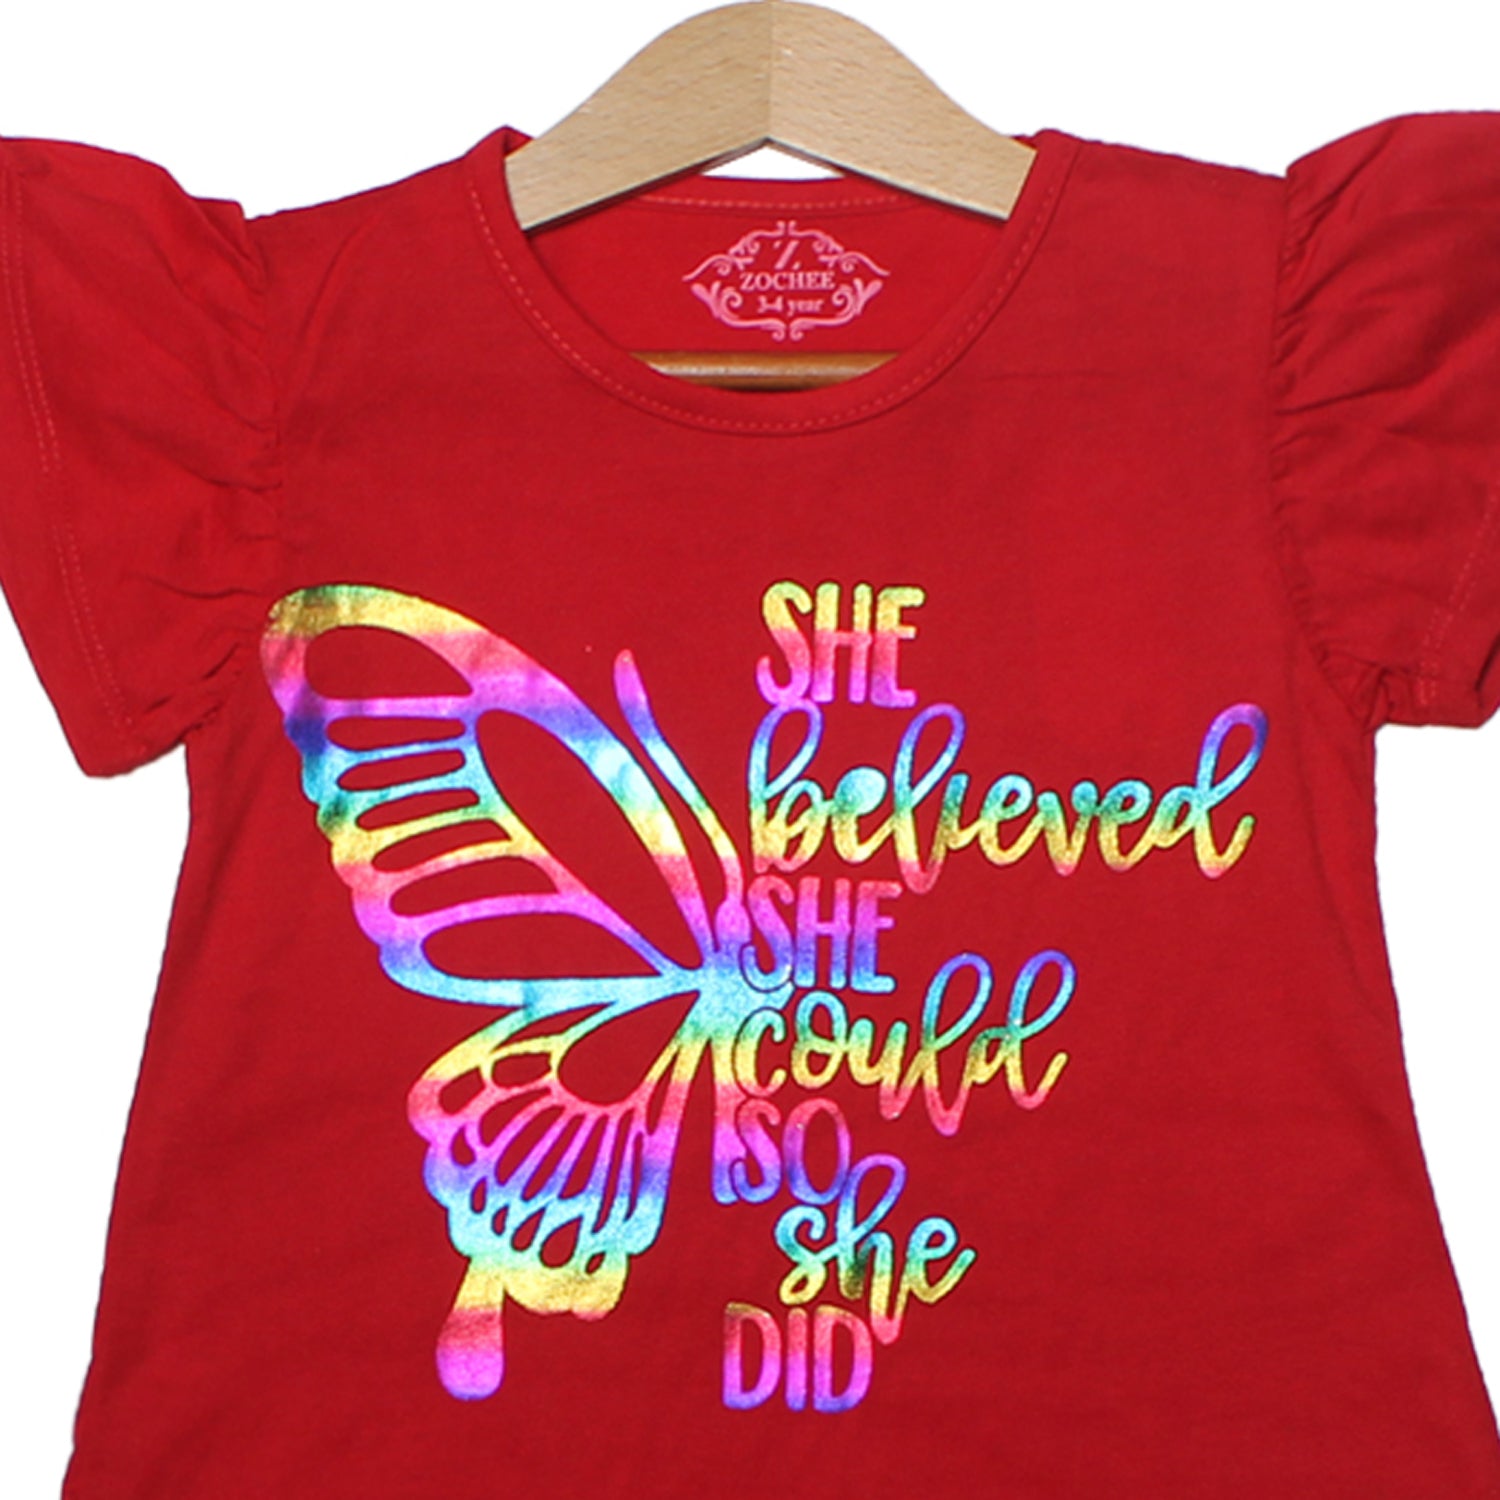 NEW RED BUTTERFLY PRINTED T-SHIRT TOP FOR GIRLS